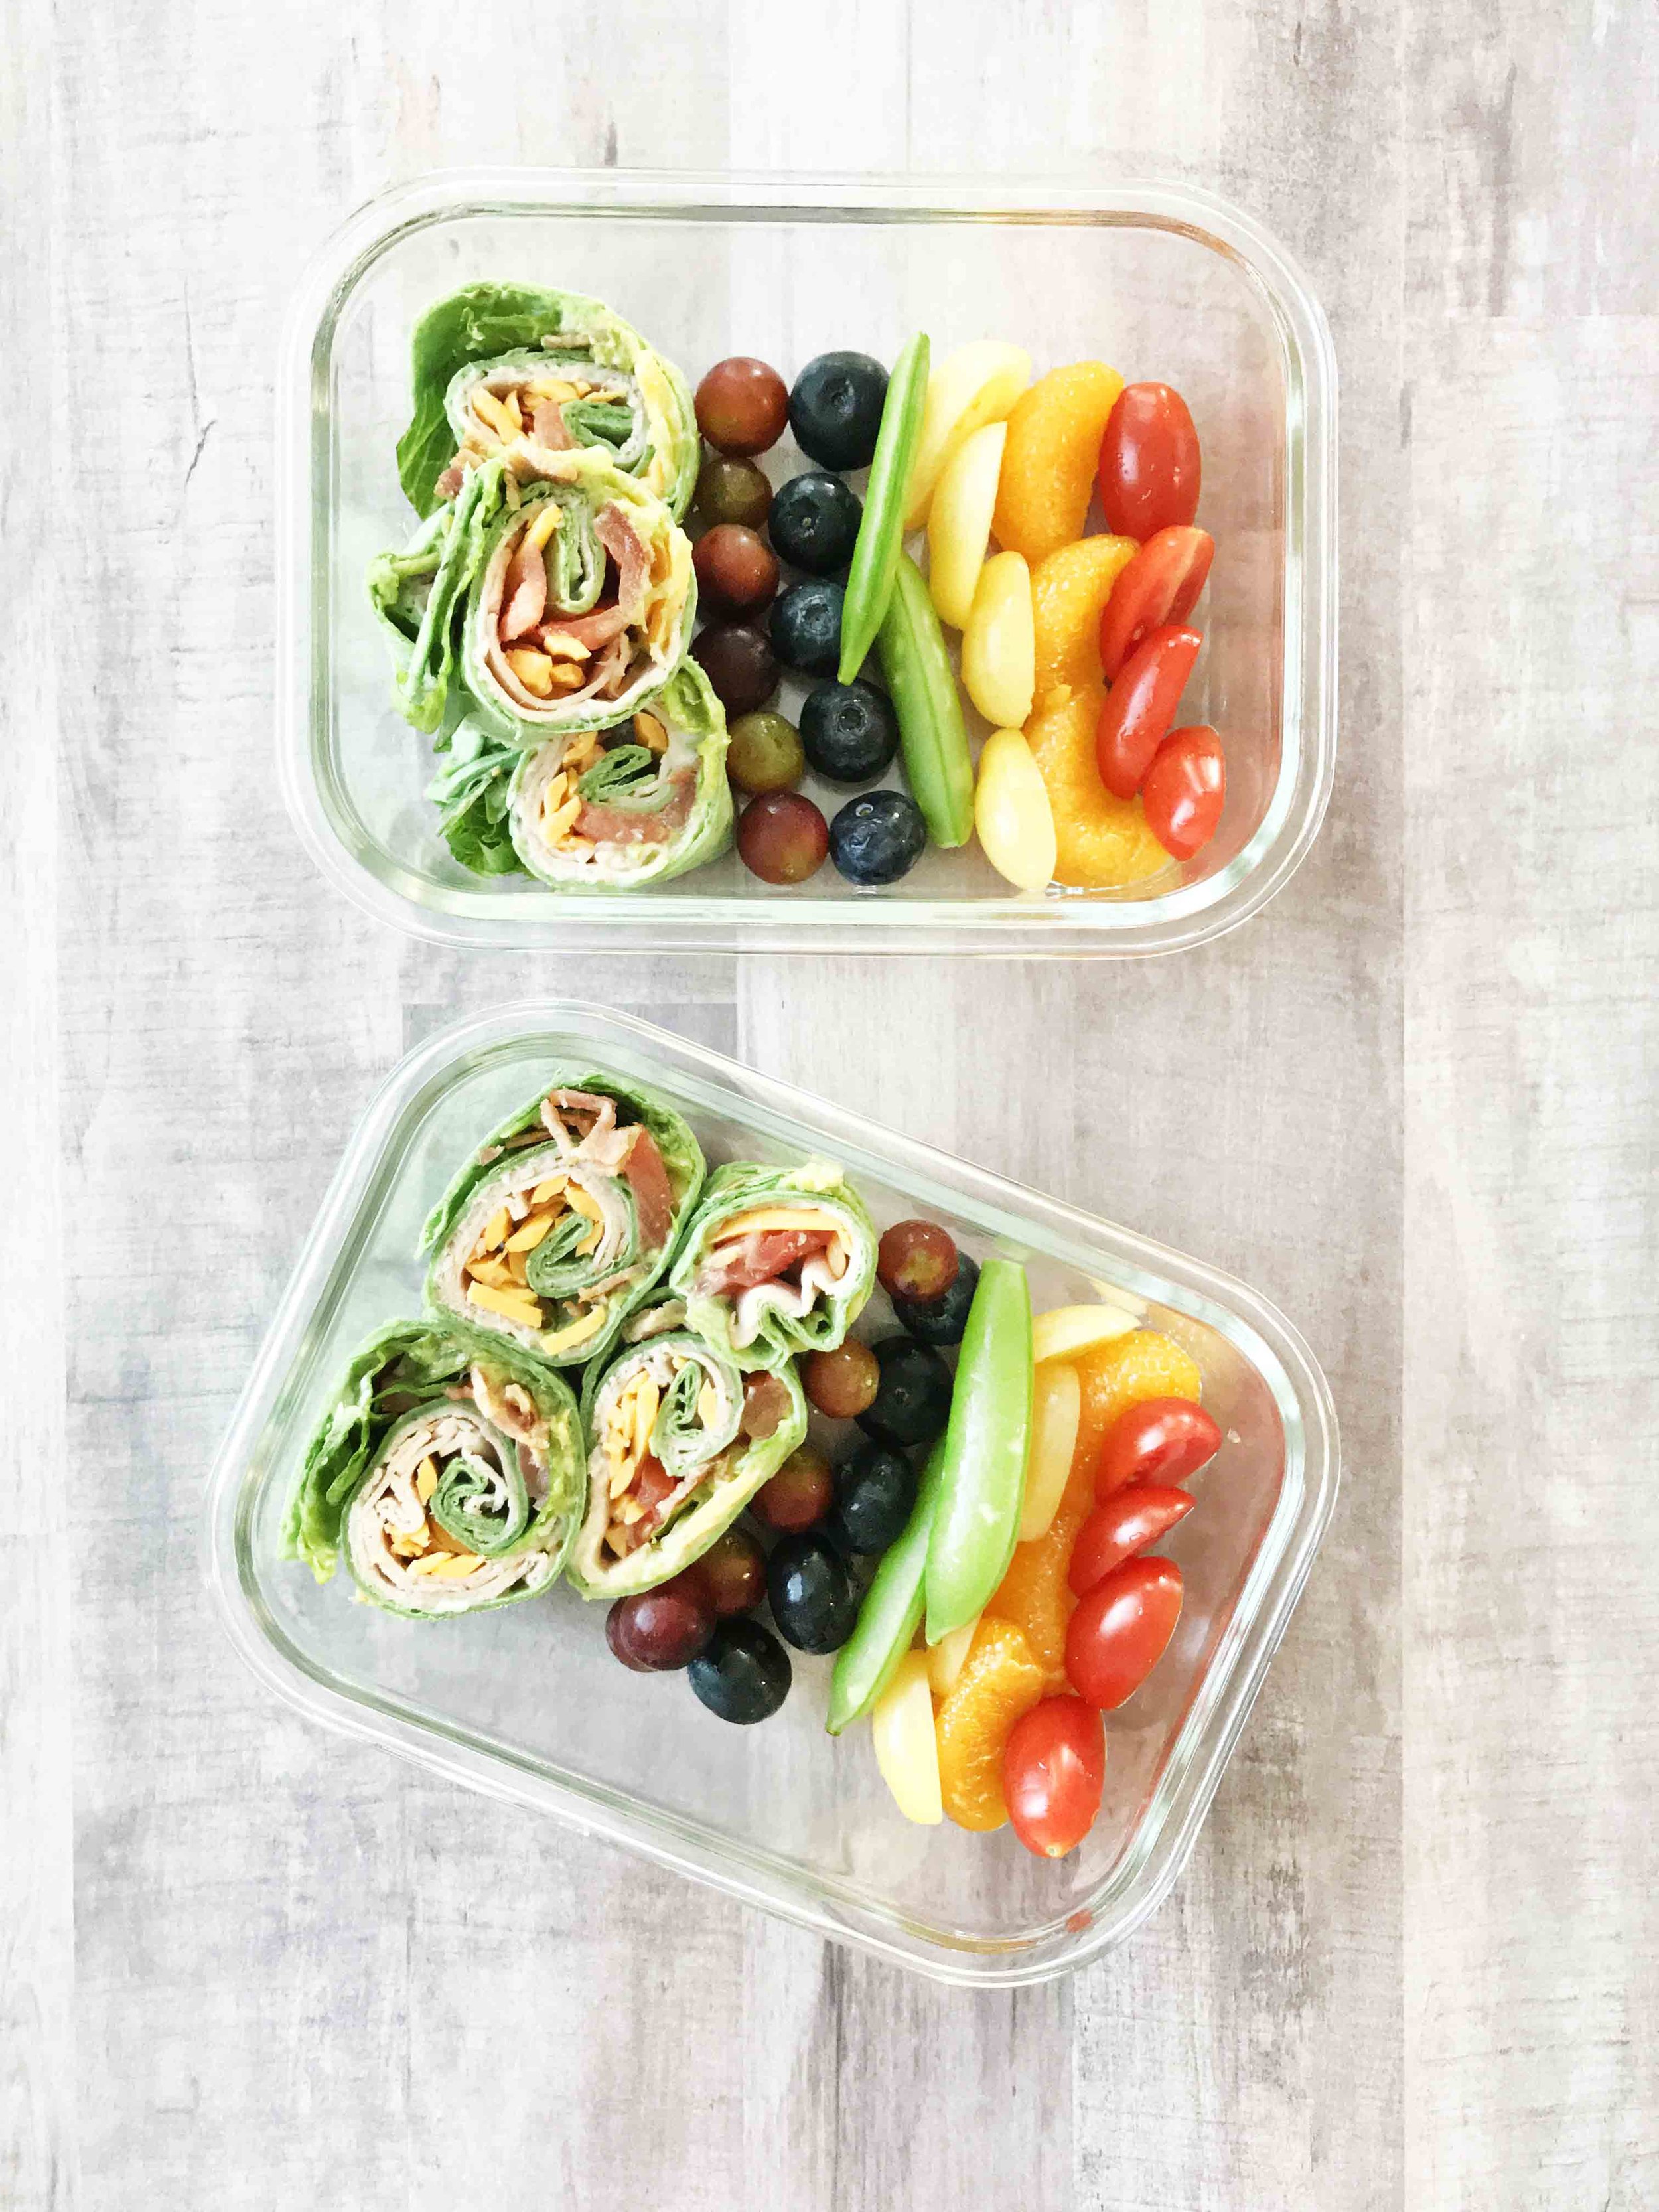 Rainbow Packed Lunch - Apple & Eve